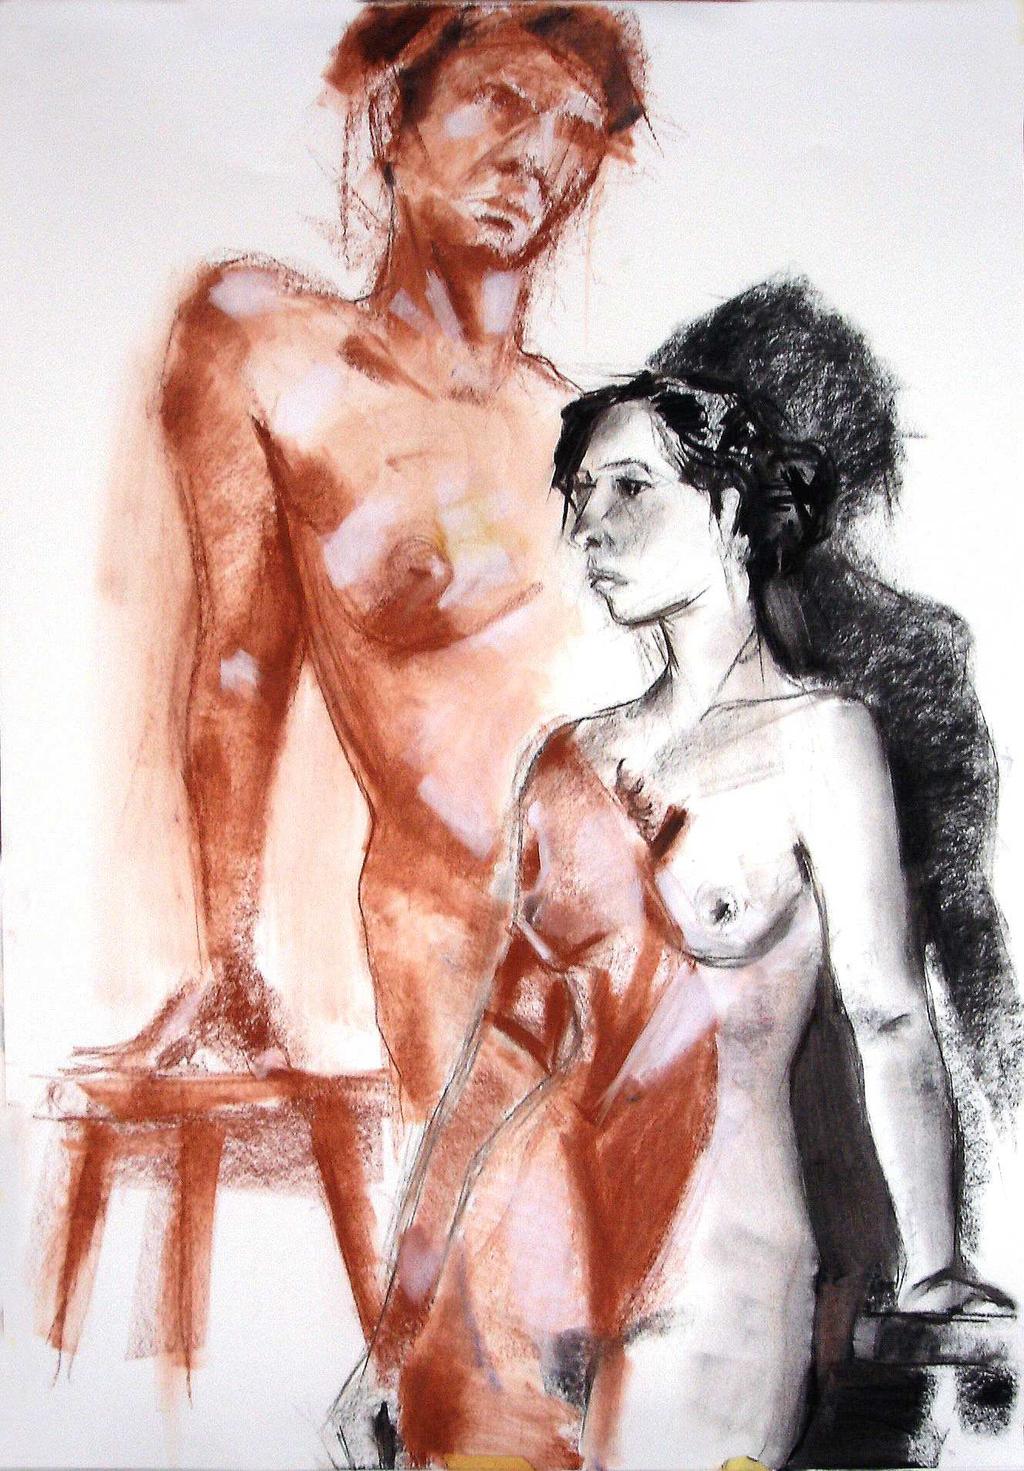 Fig 5. Lluís Farré. Charcoal and sanguine on Ingres paper. 1000x700 mm. 2008.